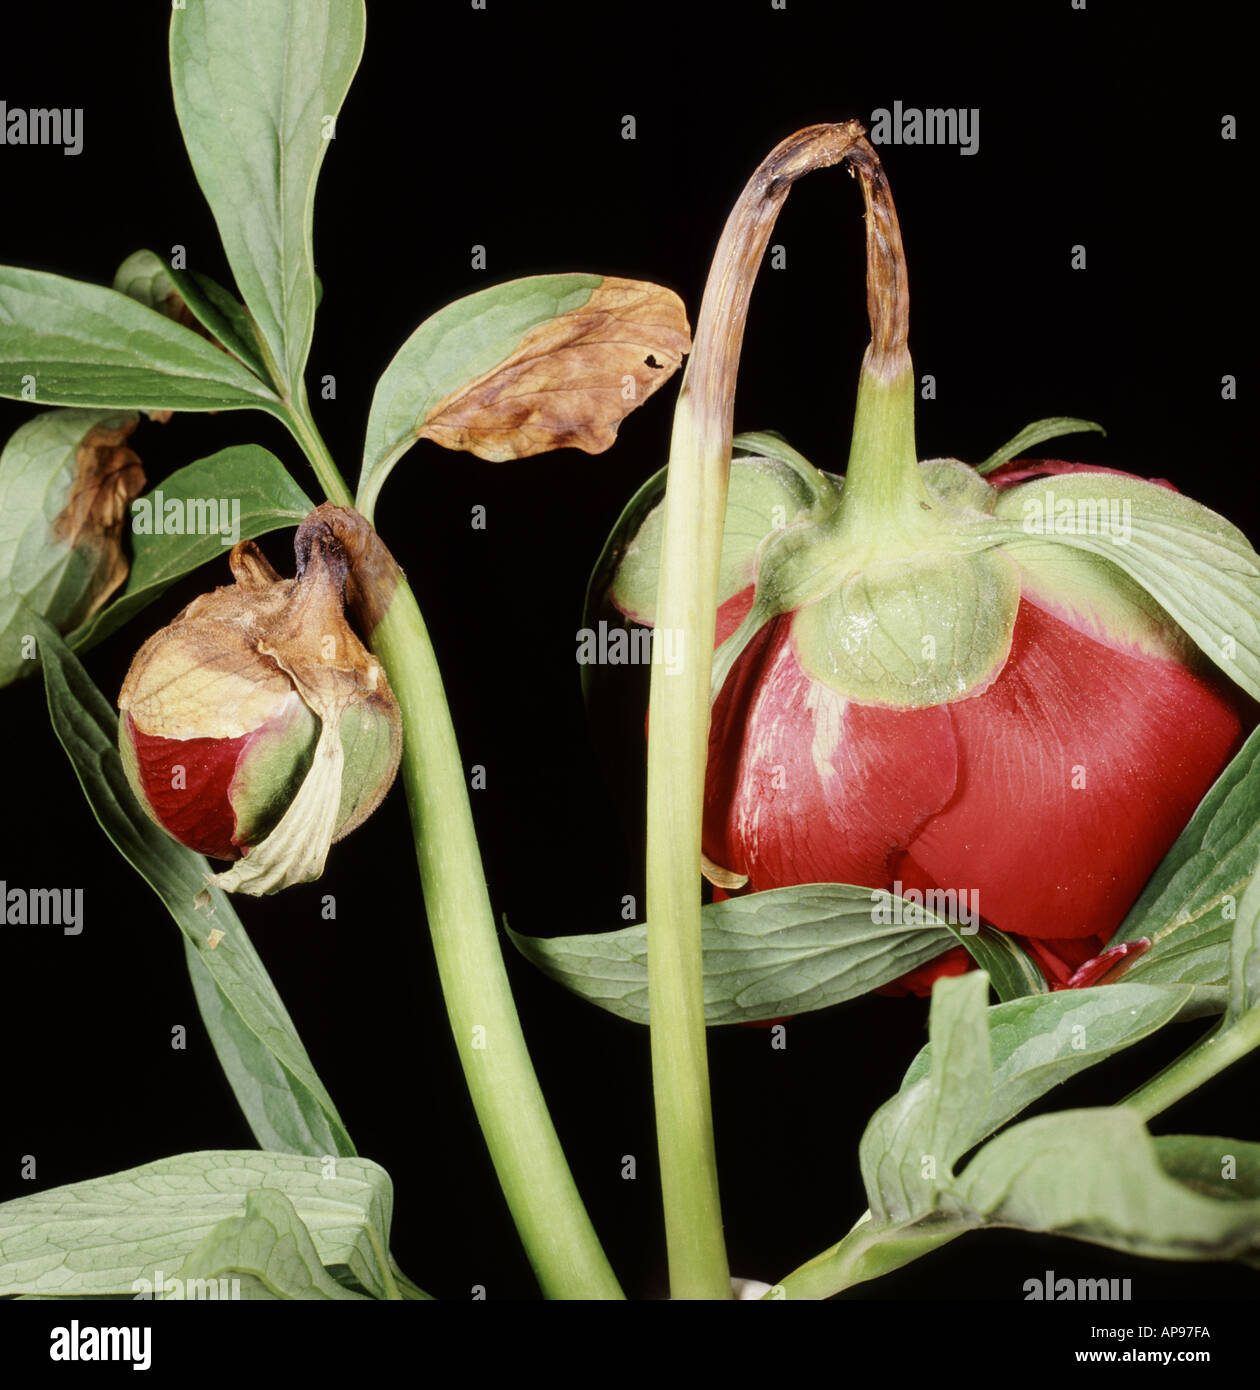 Peony wilt or blight (Botrytis paeoniae) on Peony flower showing diseased flower buds Stock Photo